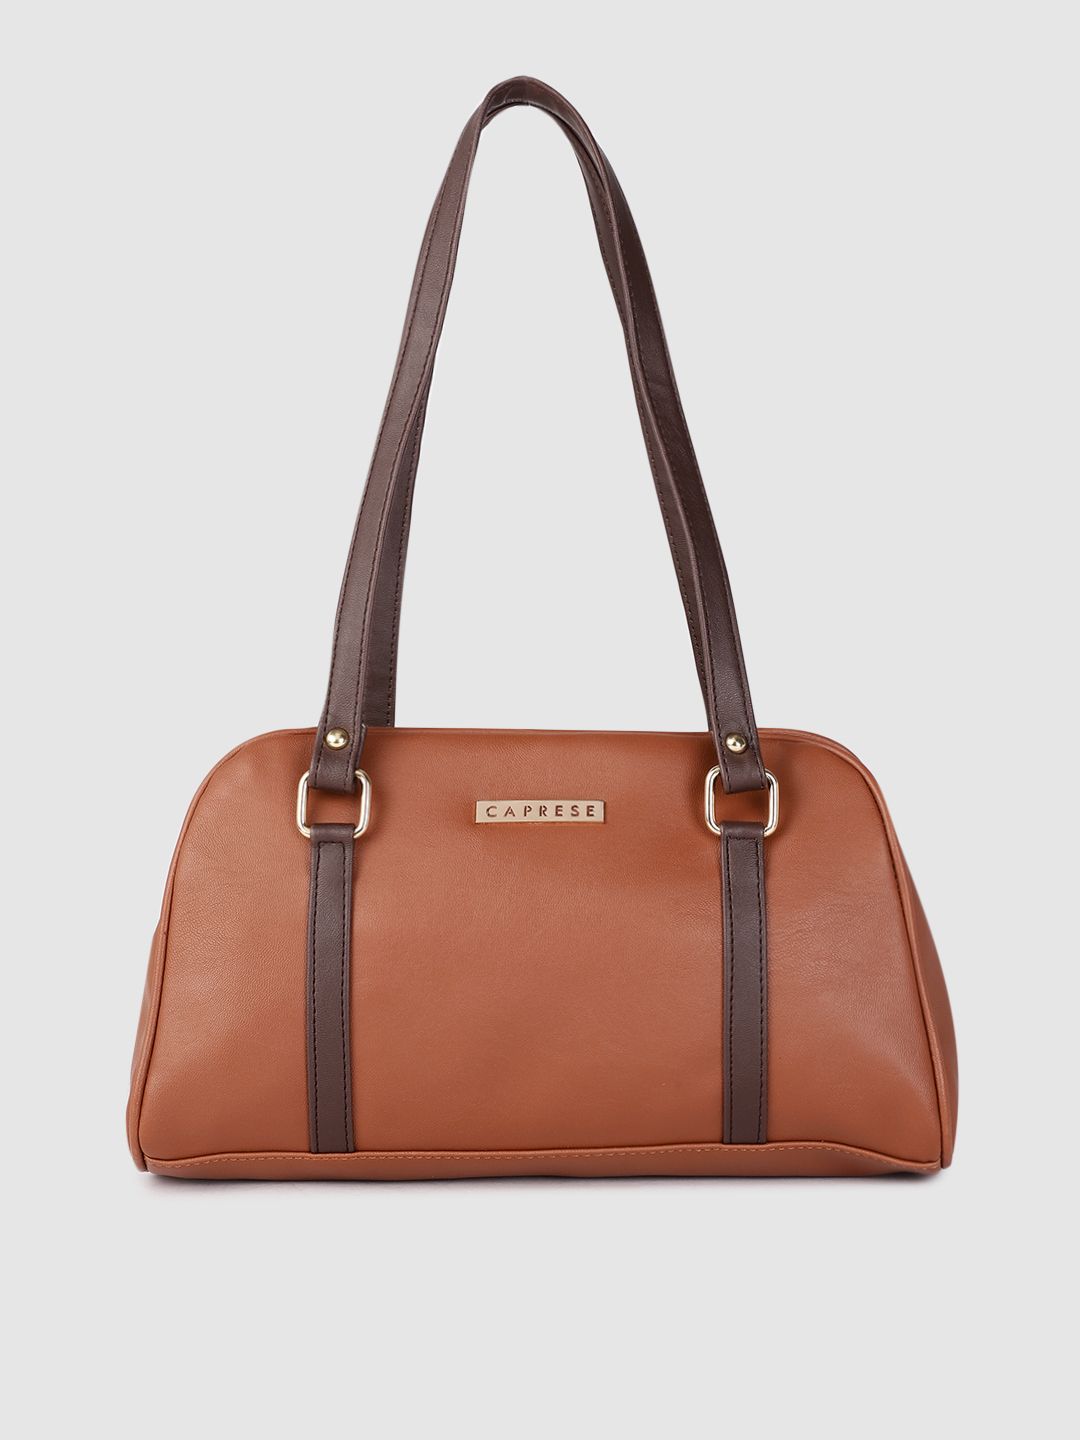 Caprese Brown Leather Structured Shoulder Bag Price in India